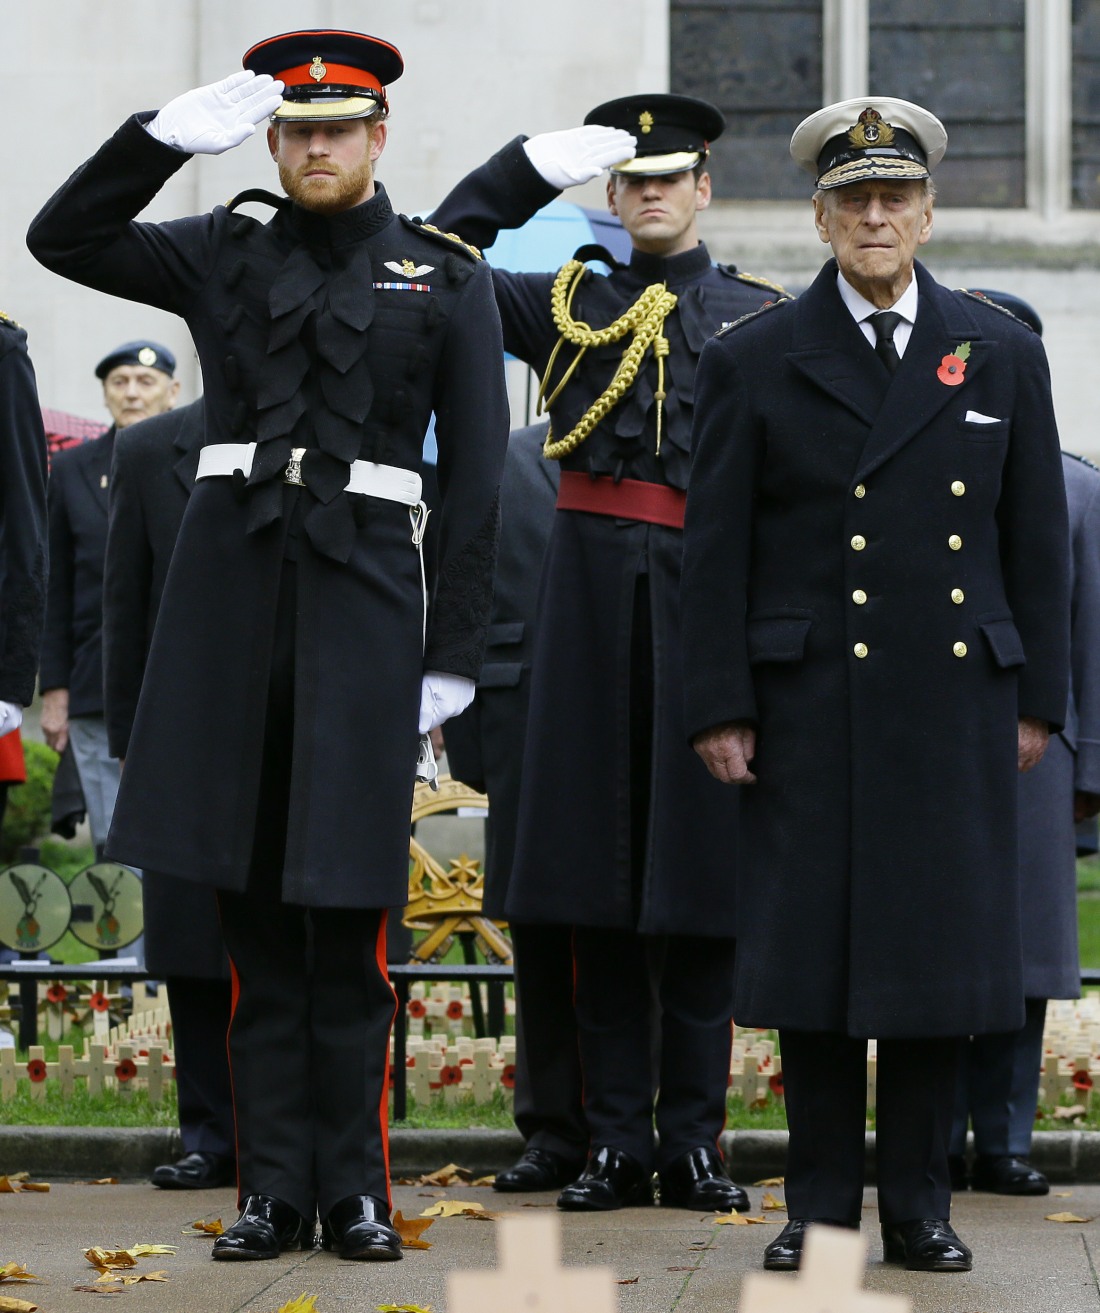 Britain's Prince Harry, left, salutes next to The Duke of Edinburgh during a visit to the Field of Remembrance at Westminster Abbey in London, Thursday, Nov. 5, 2015. The Duke of Edinburgh and Prince Harry each placed a Cross of Remembrance for Unknown Br